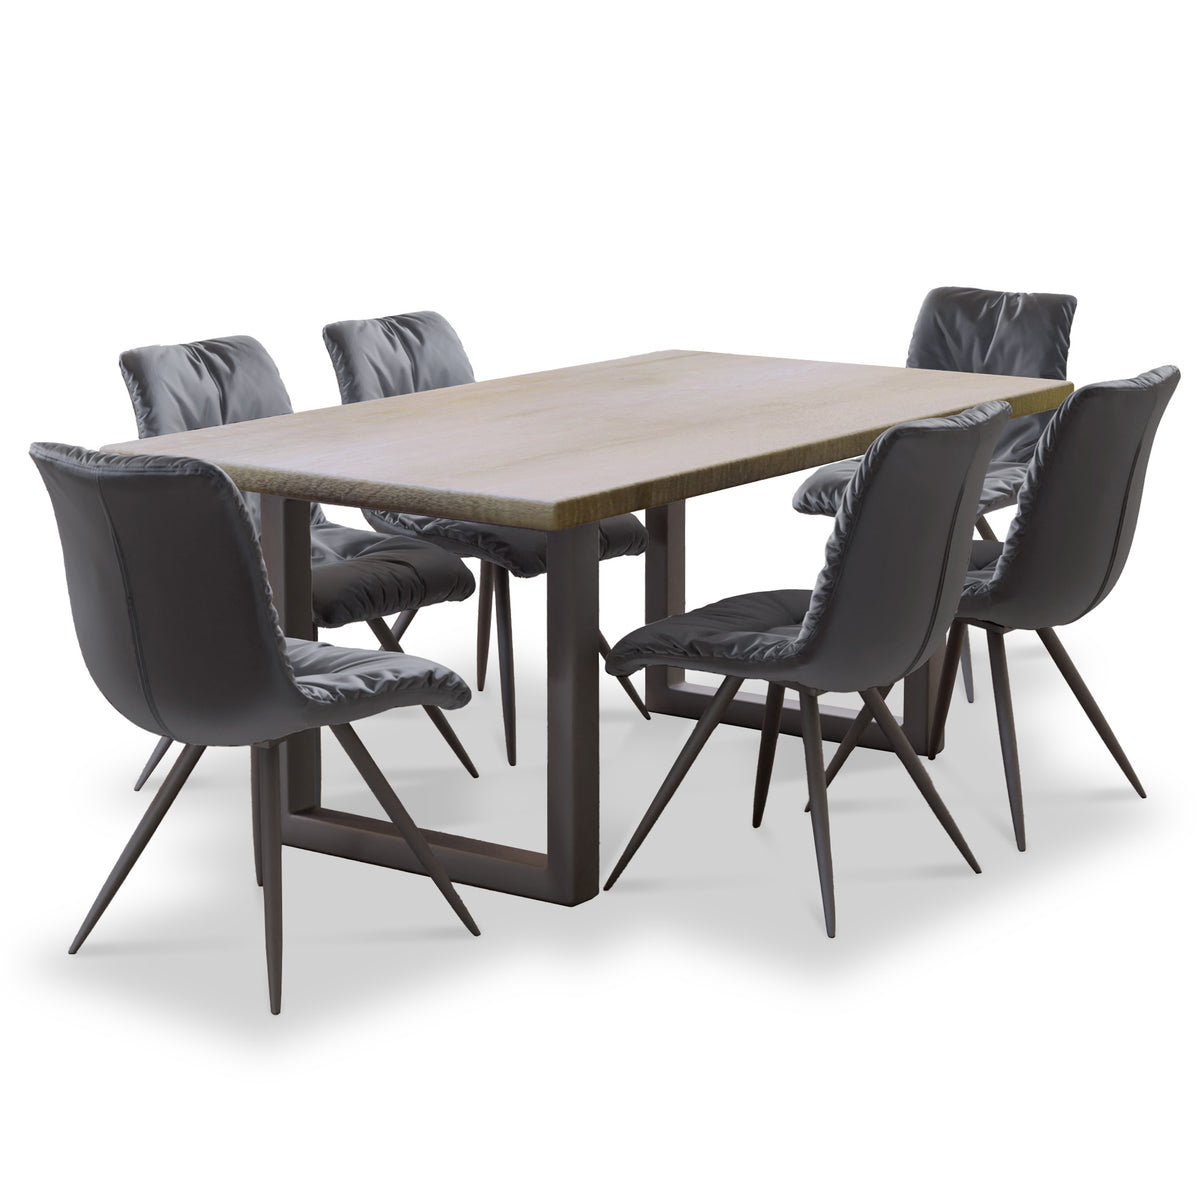 Thelma 1.8m Dining Table with 6 Addison Dark Grey Chairs